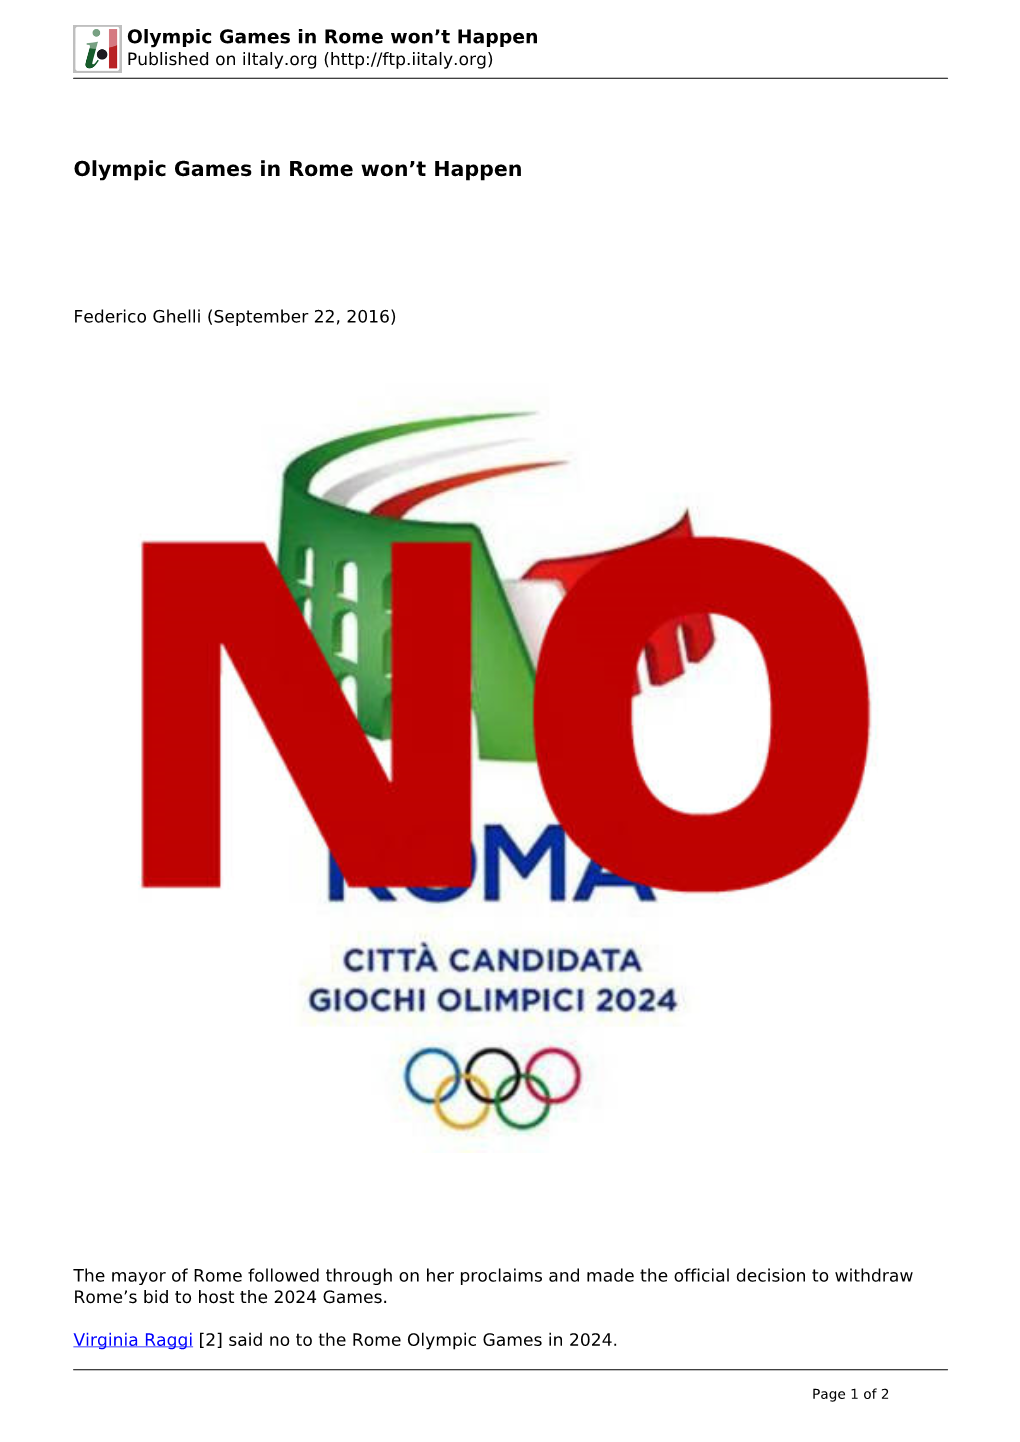 Olympic Games in Rome Won't Happen